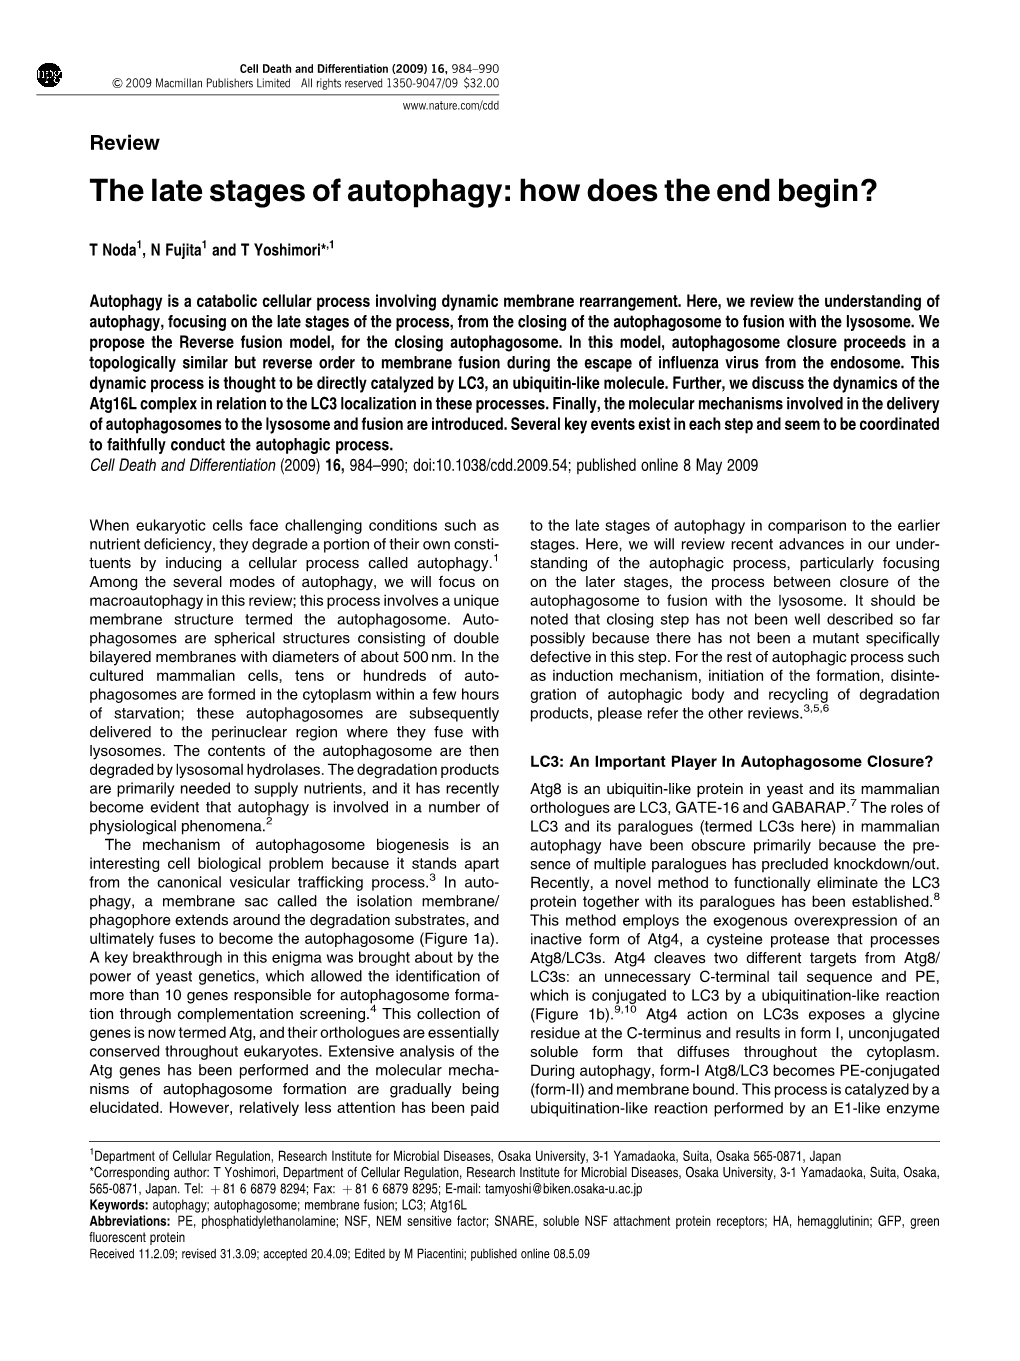 The Late Stages of Autophagy: How Does the End Begin?